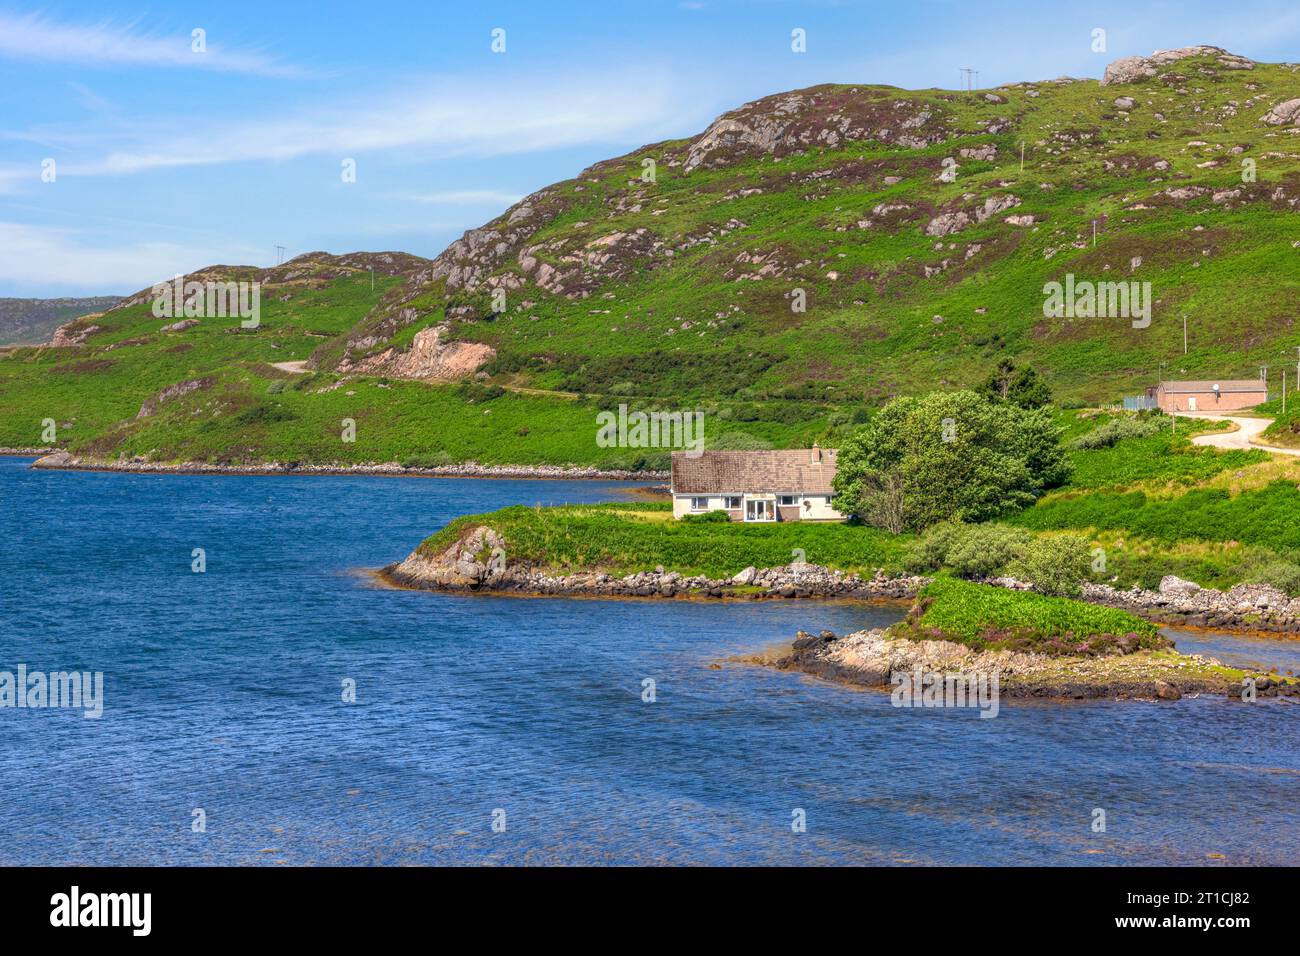 Loch Inchard is a sea loch located in Durness, Sutherland, Scotland. Stock Photo